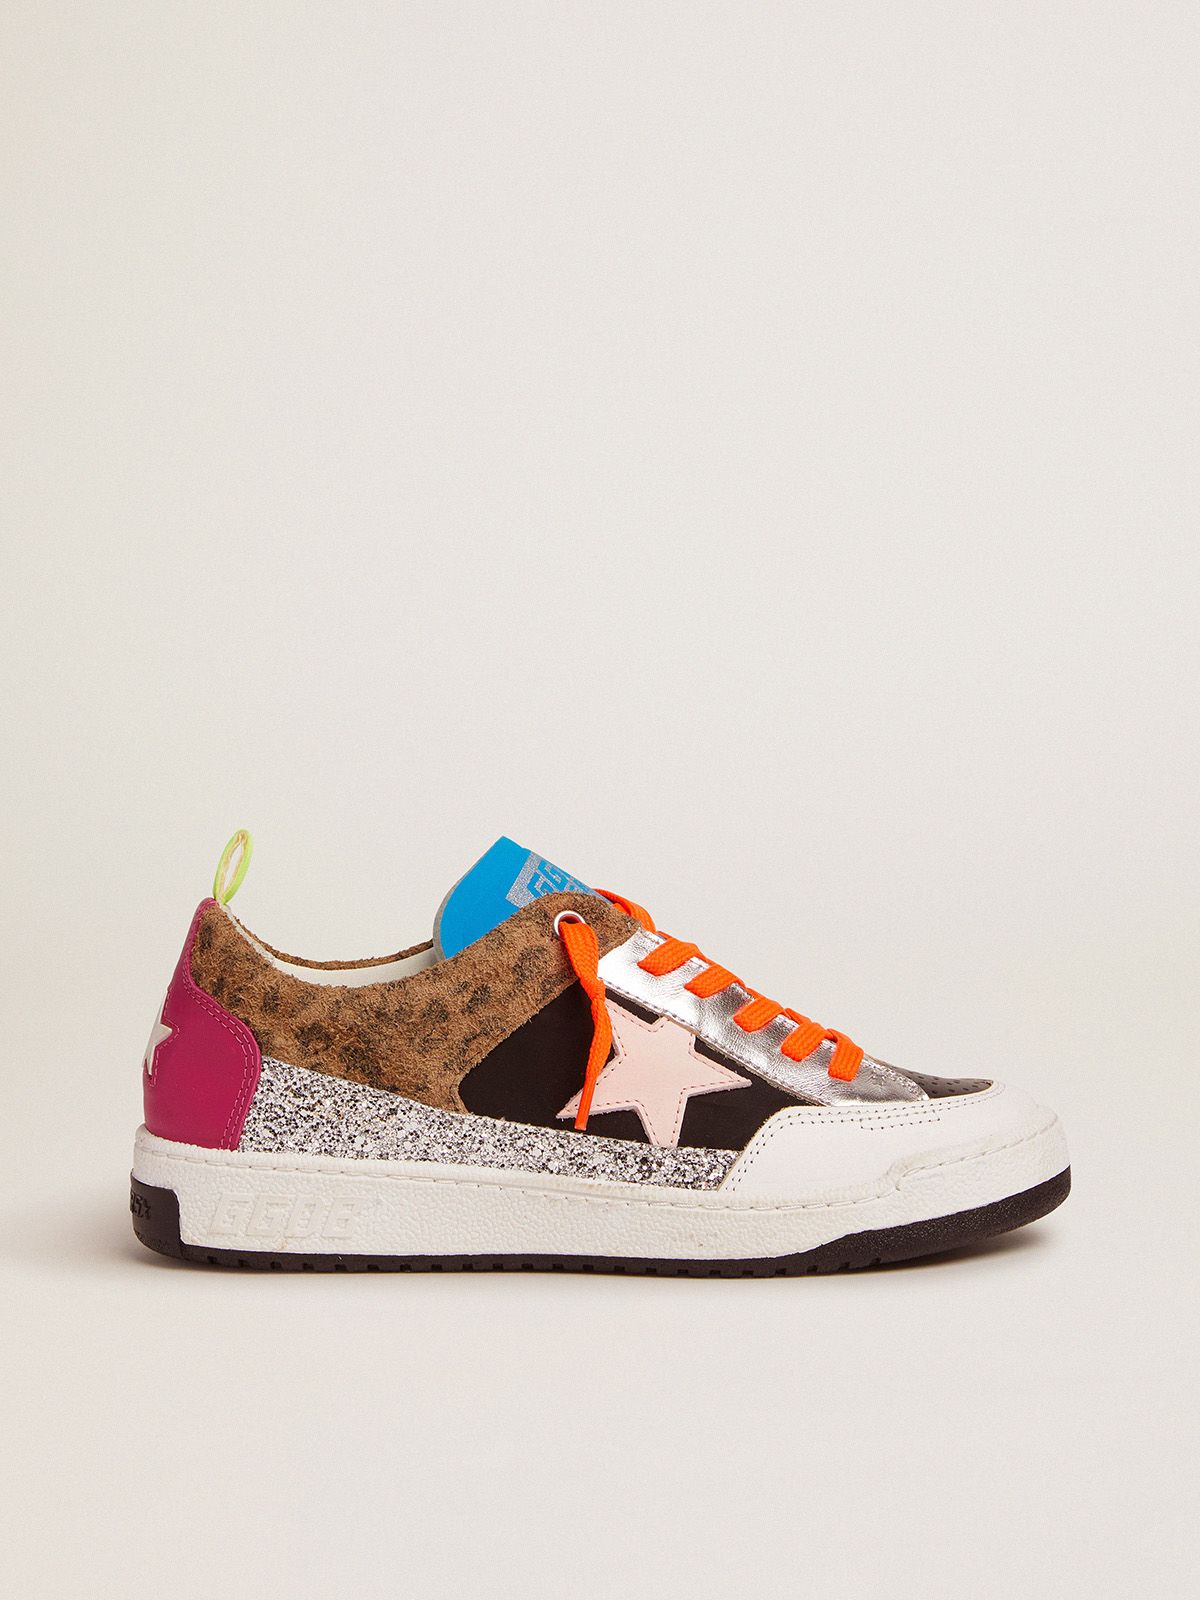 Golden Goose Superstar Yeah sneakers with silver glitter, animal-print and colored leather patchwork